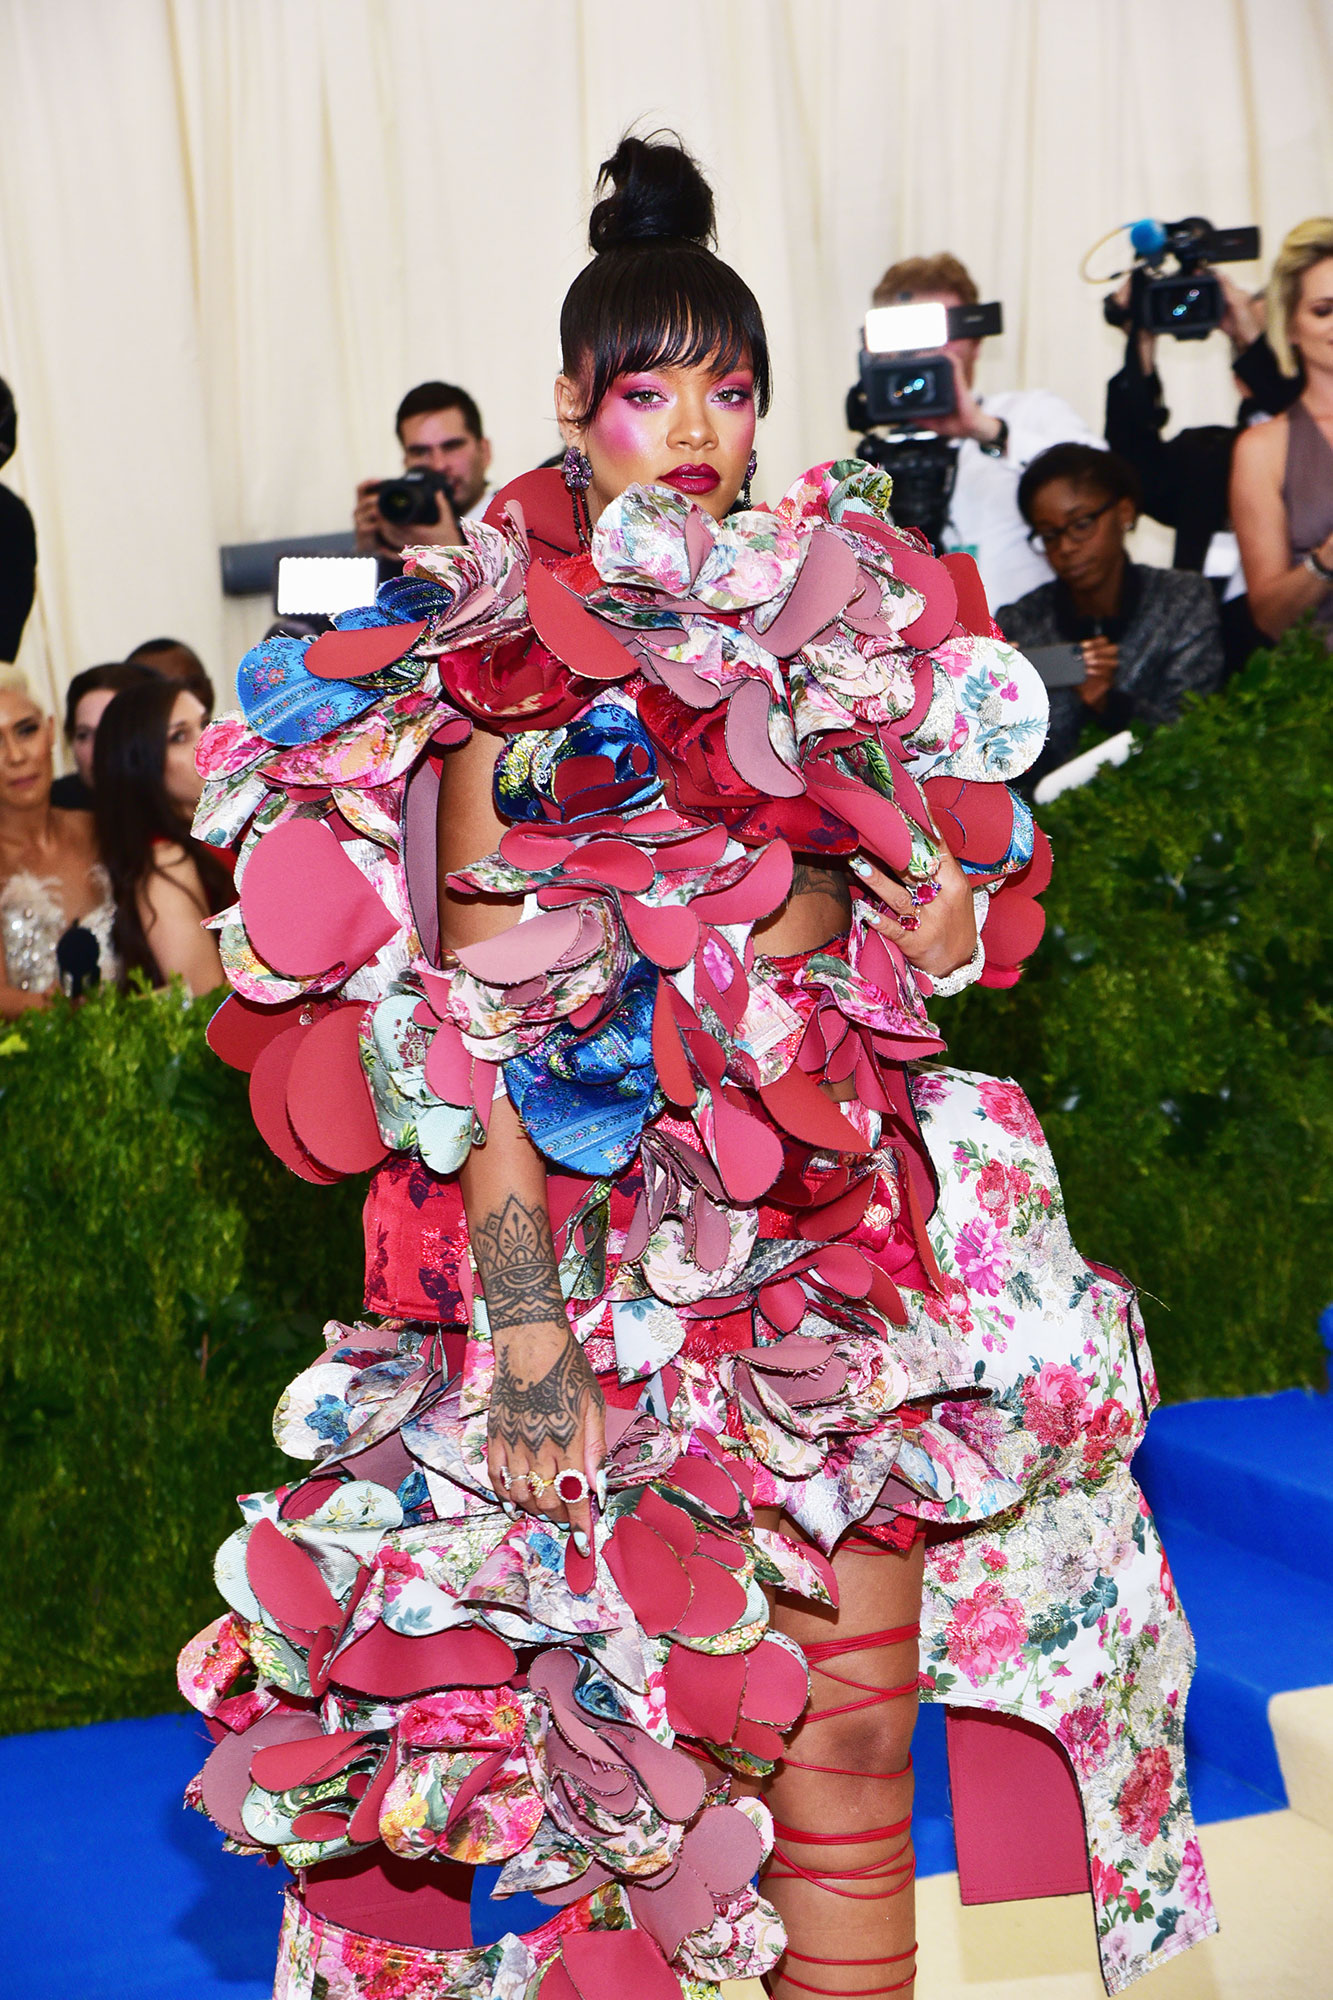 Rihanna The Wild Met Gala Red Carpet Fashion Looks We Can't Stop Thinking About